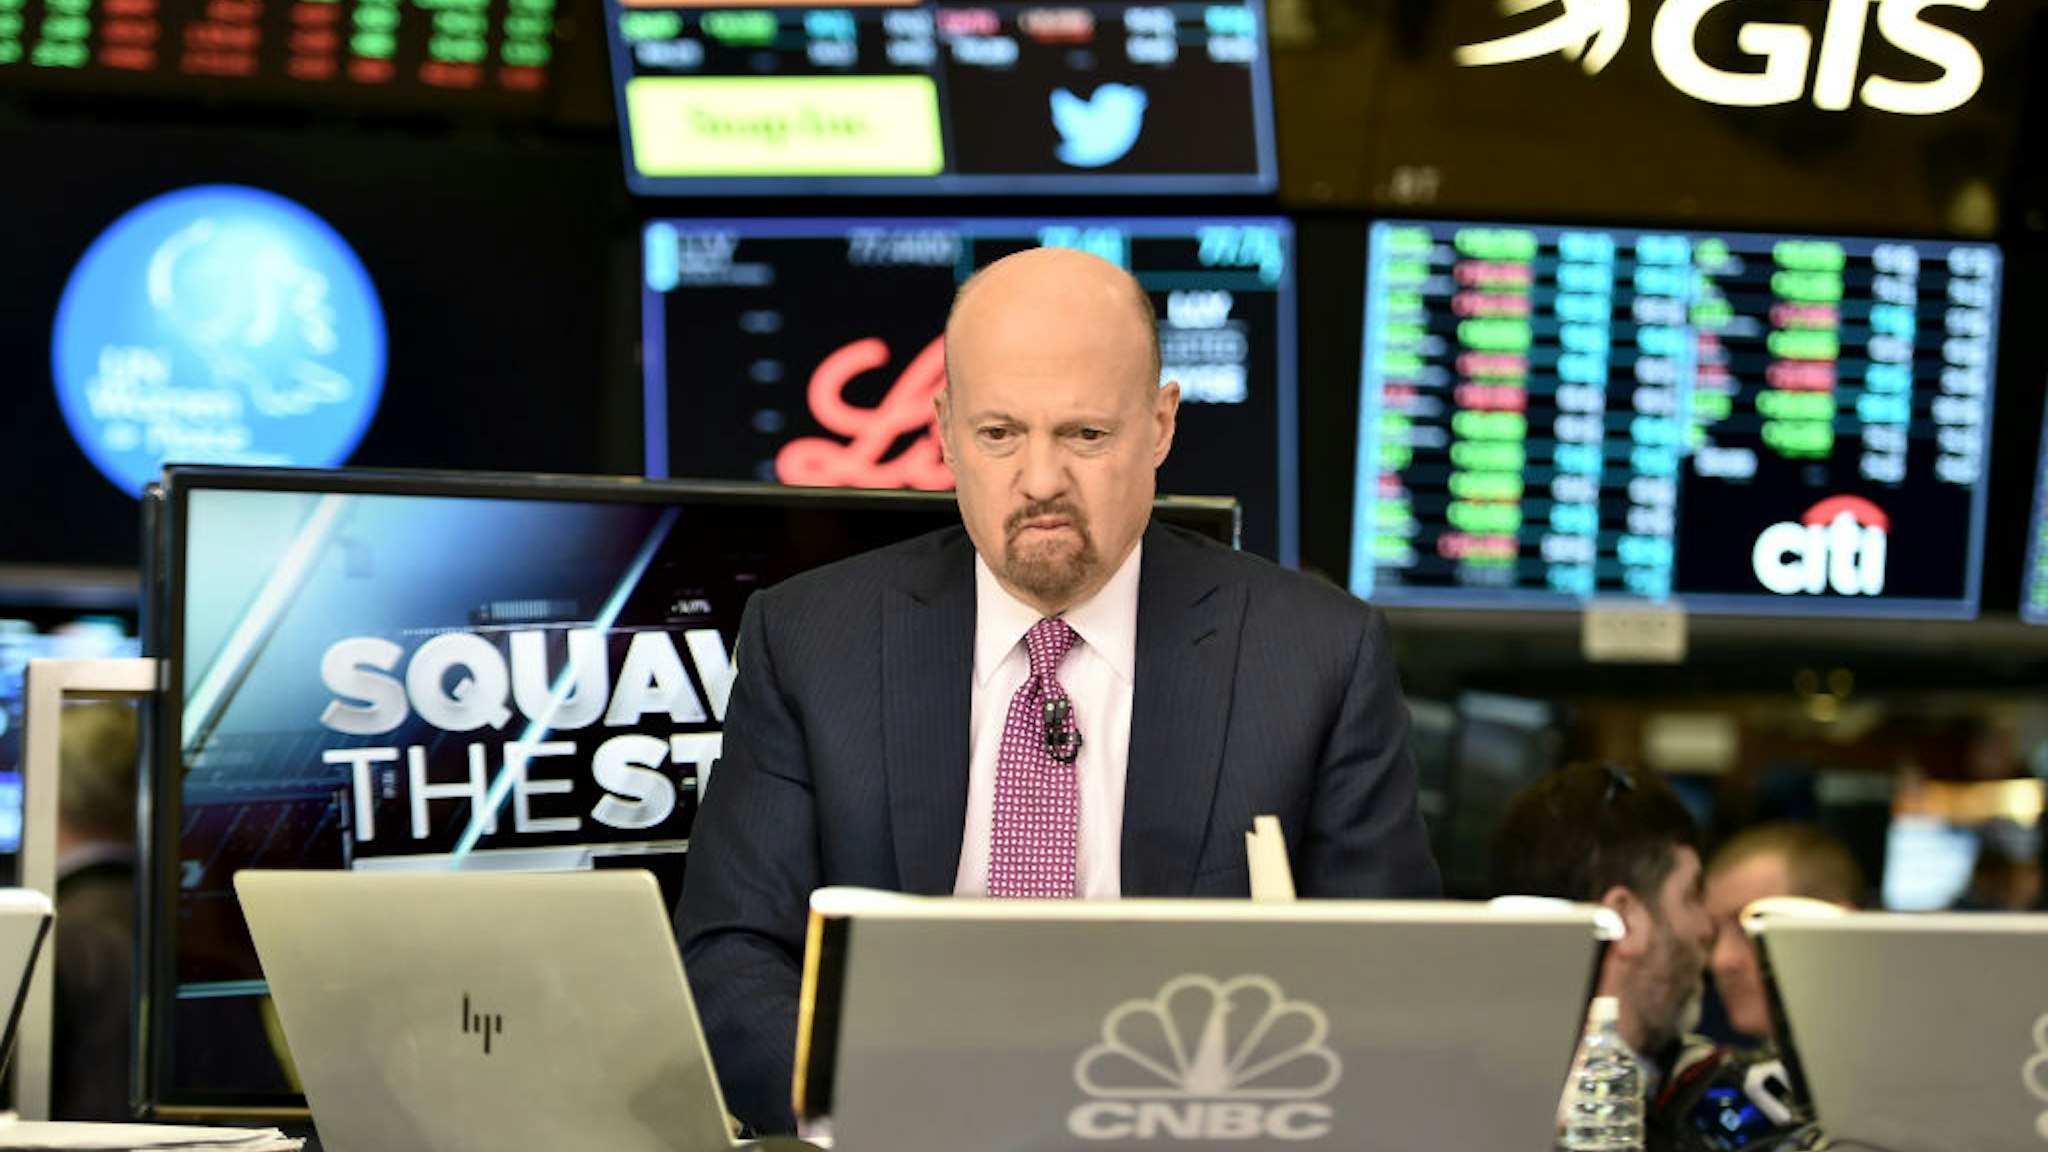 NEW YORK, NY - MARCH 08: Jim Cramer spotted on the floor of the NYSE during UNWFPA's NYSE bell ringing in celebration of International Women's Day at New York Stock Exchange on March 8, 2018 in New York City. (Photo by Steven Ferdman/Patrick McMullan via Getty Images)